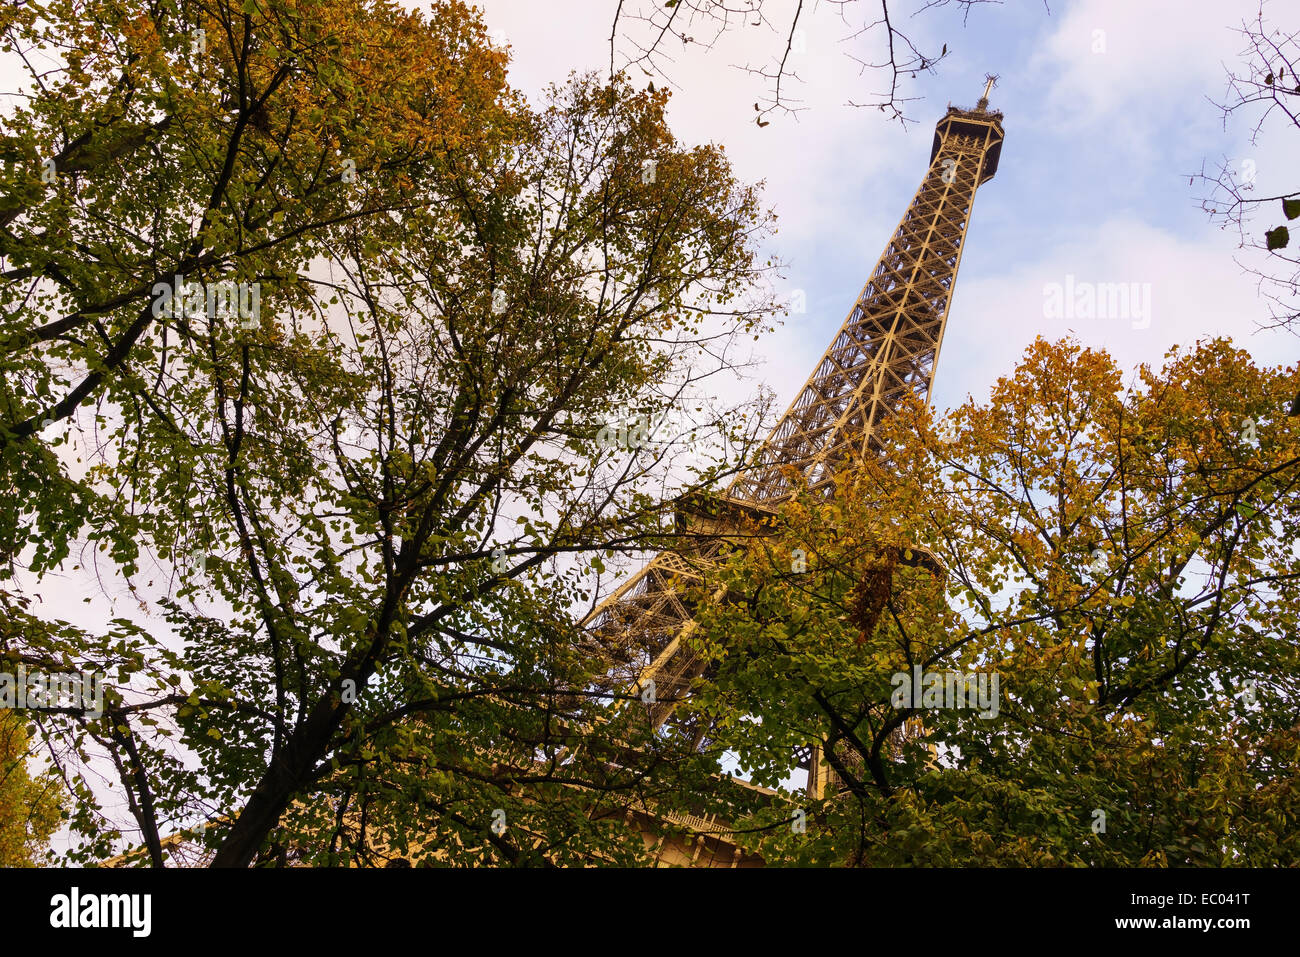 The Eiffel Tower viewed through trees in autumn. Paris, France. Stock Photo